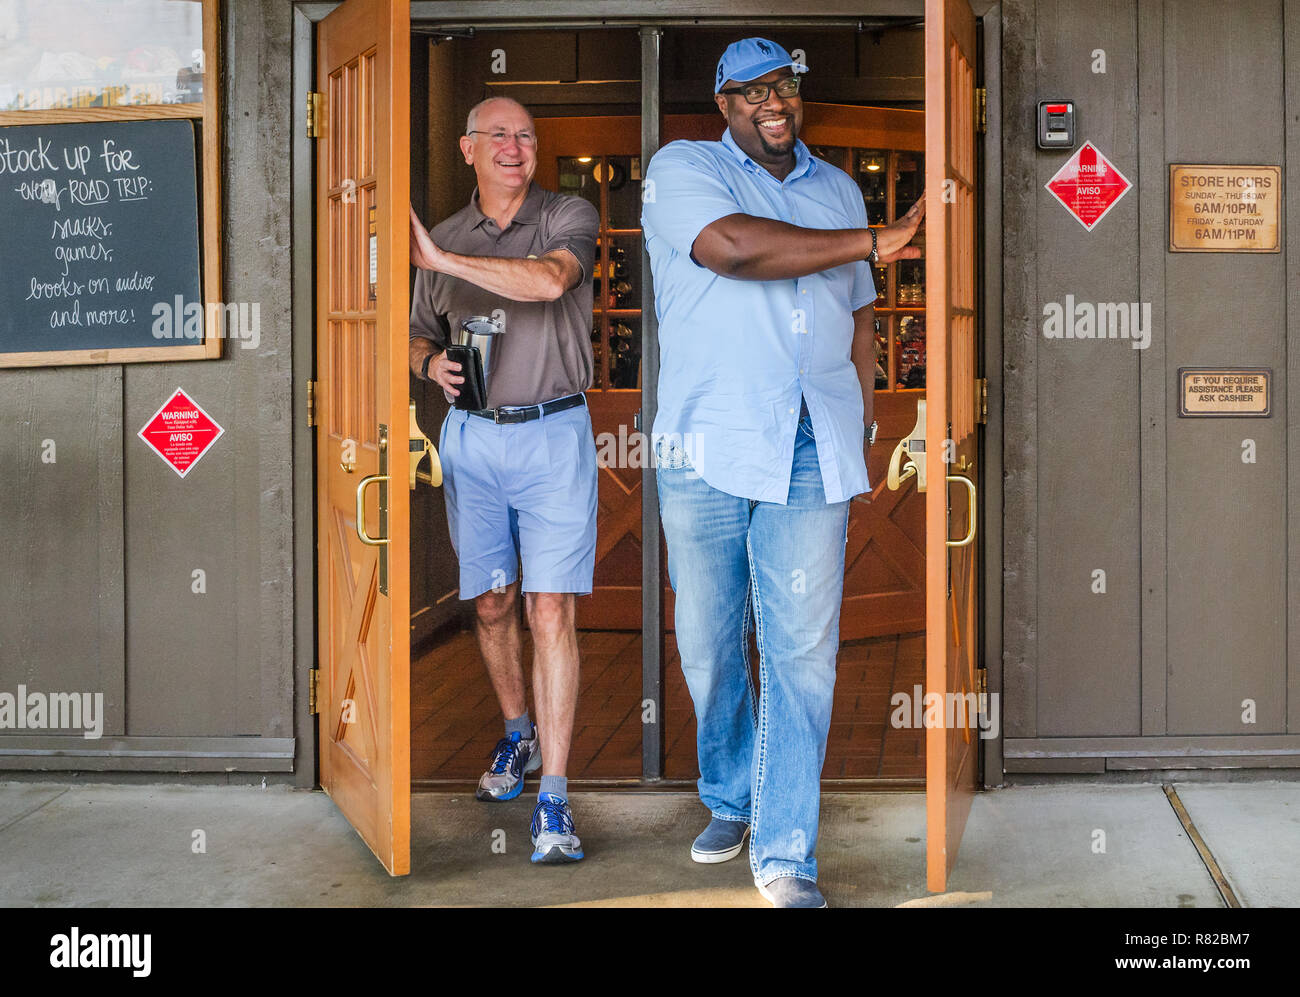 Birmingham pastors Bob Flayhart and Alton Hardy smile as they leave Cracker Barrel in Birmingham, Alabama. They are working to improve race relations. Stock Photo